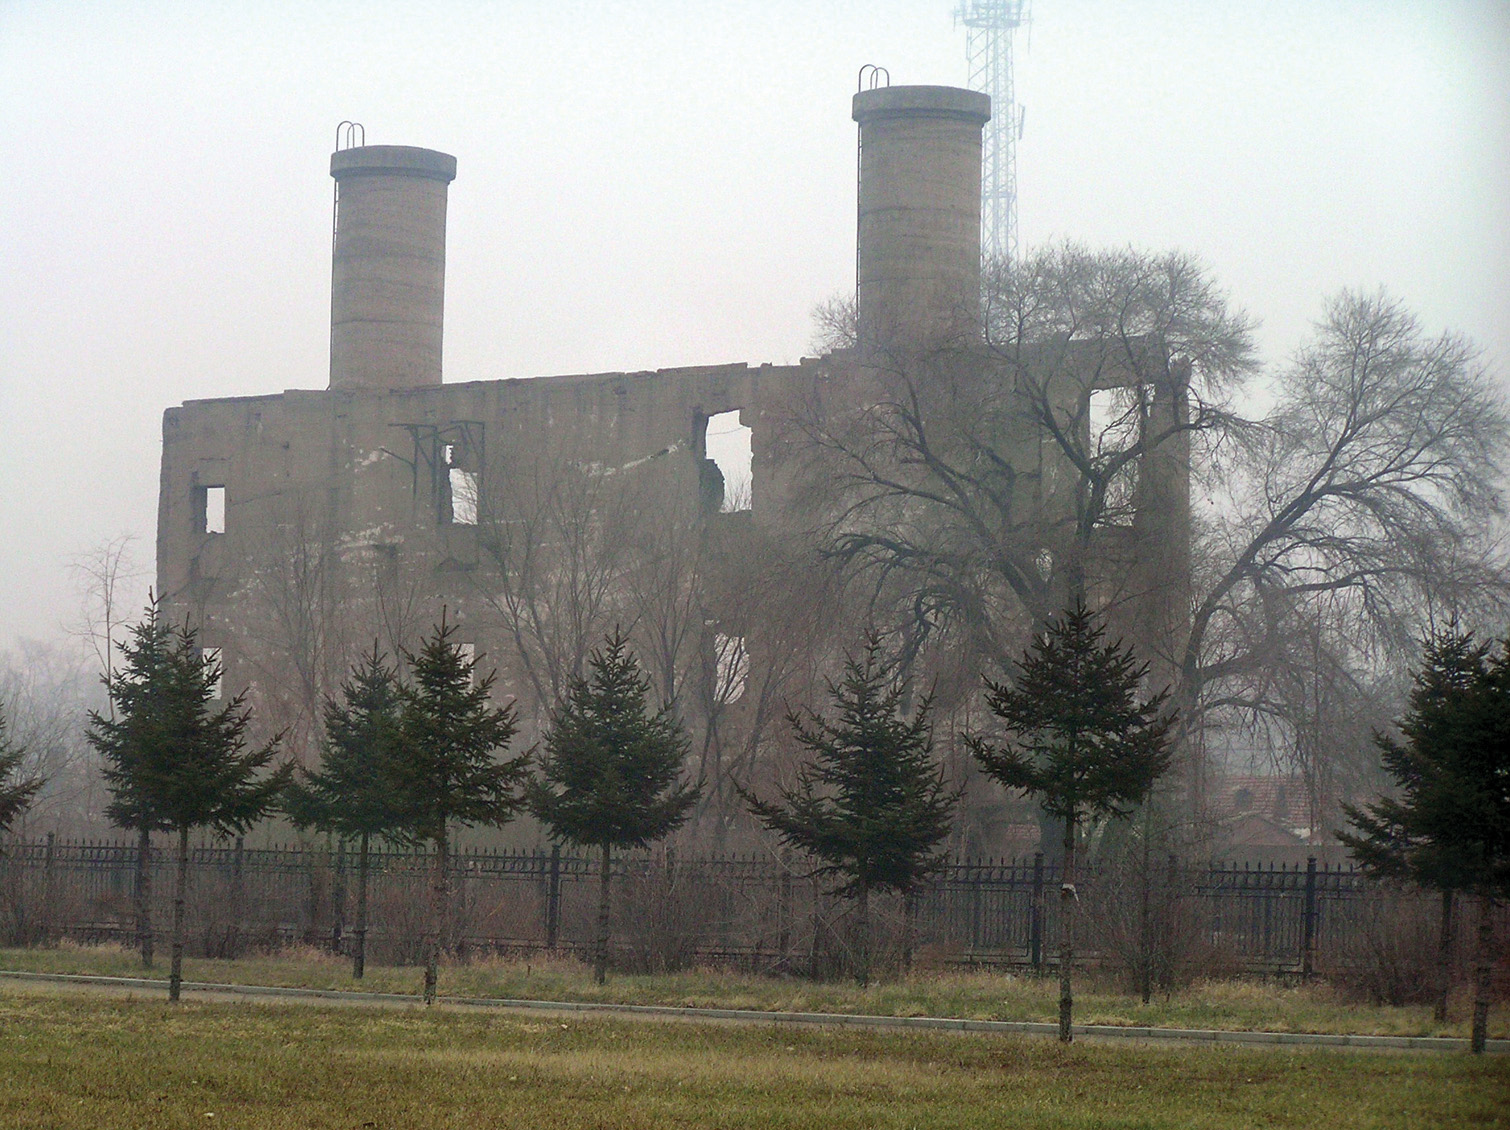 A recent photo of fog-shrouded building on the site of the Unit 731 bioweapon facility at Ping Fang. Today it is part of a museum and memorial to the victims. 